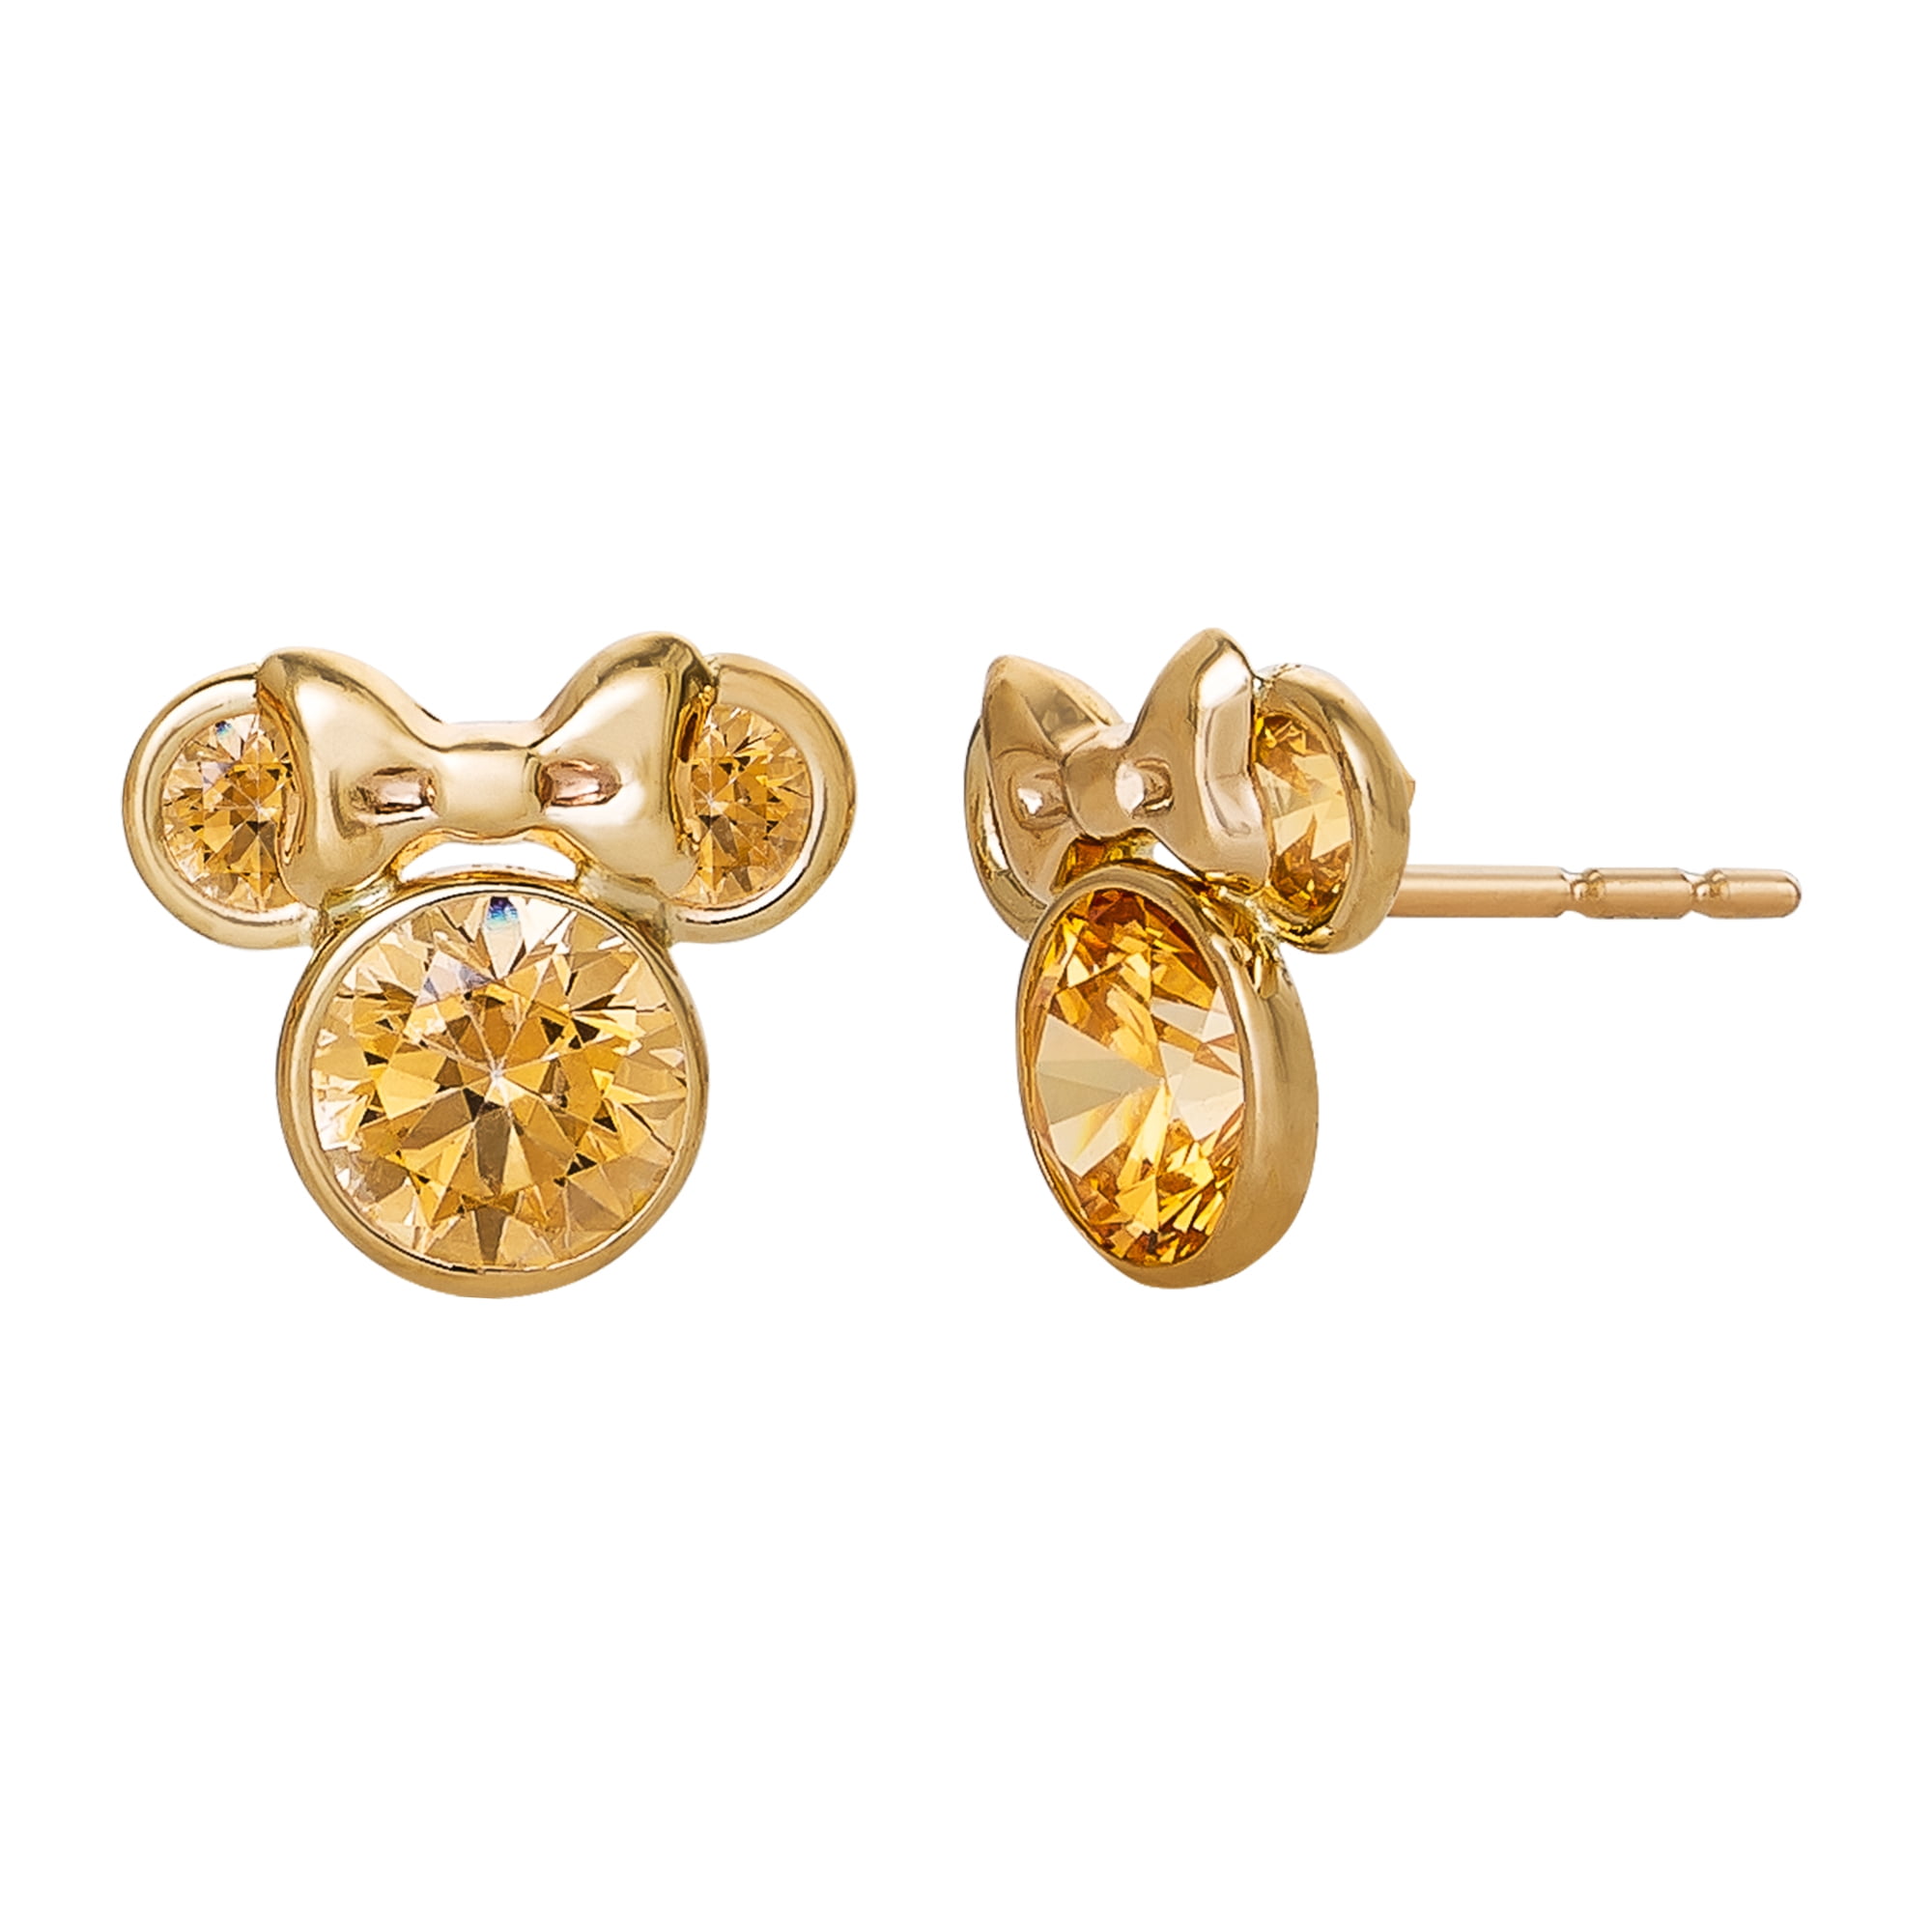 New Disney Mickey Mouse 10kt Yellow Gold White Pearl Girls Stud Set Earrings 